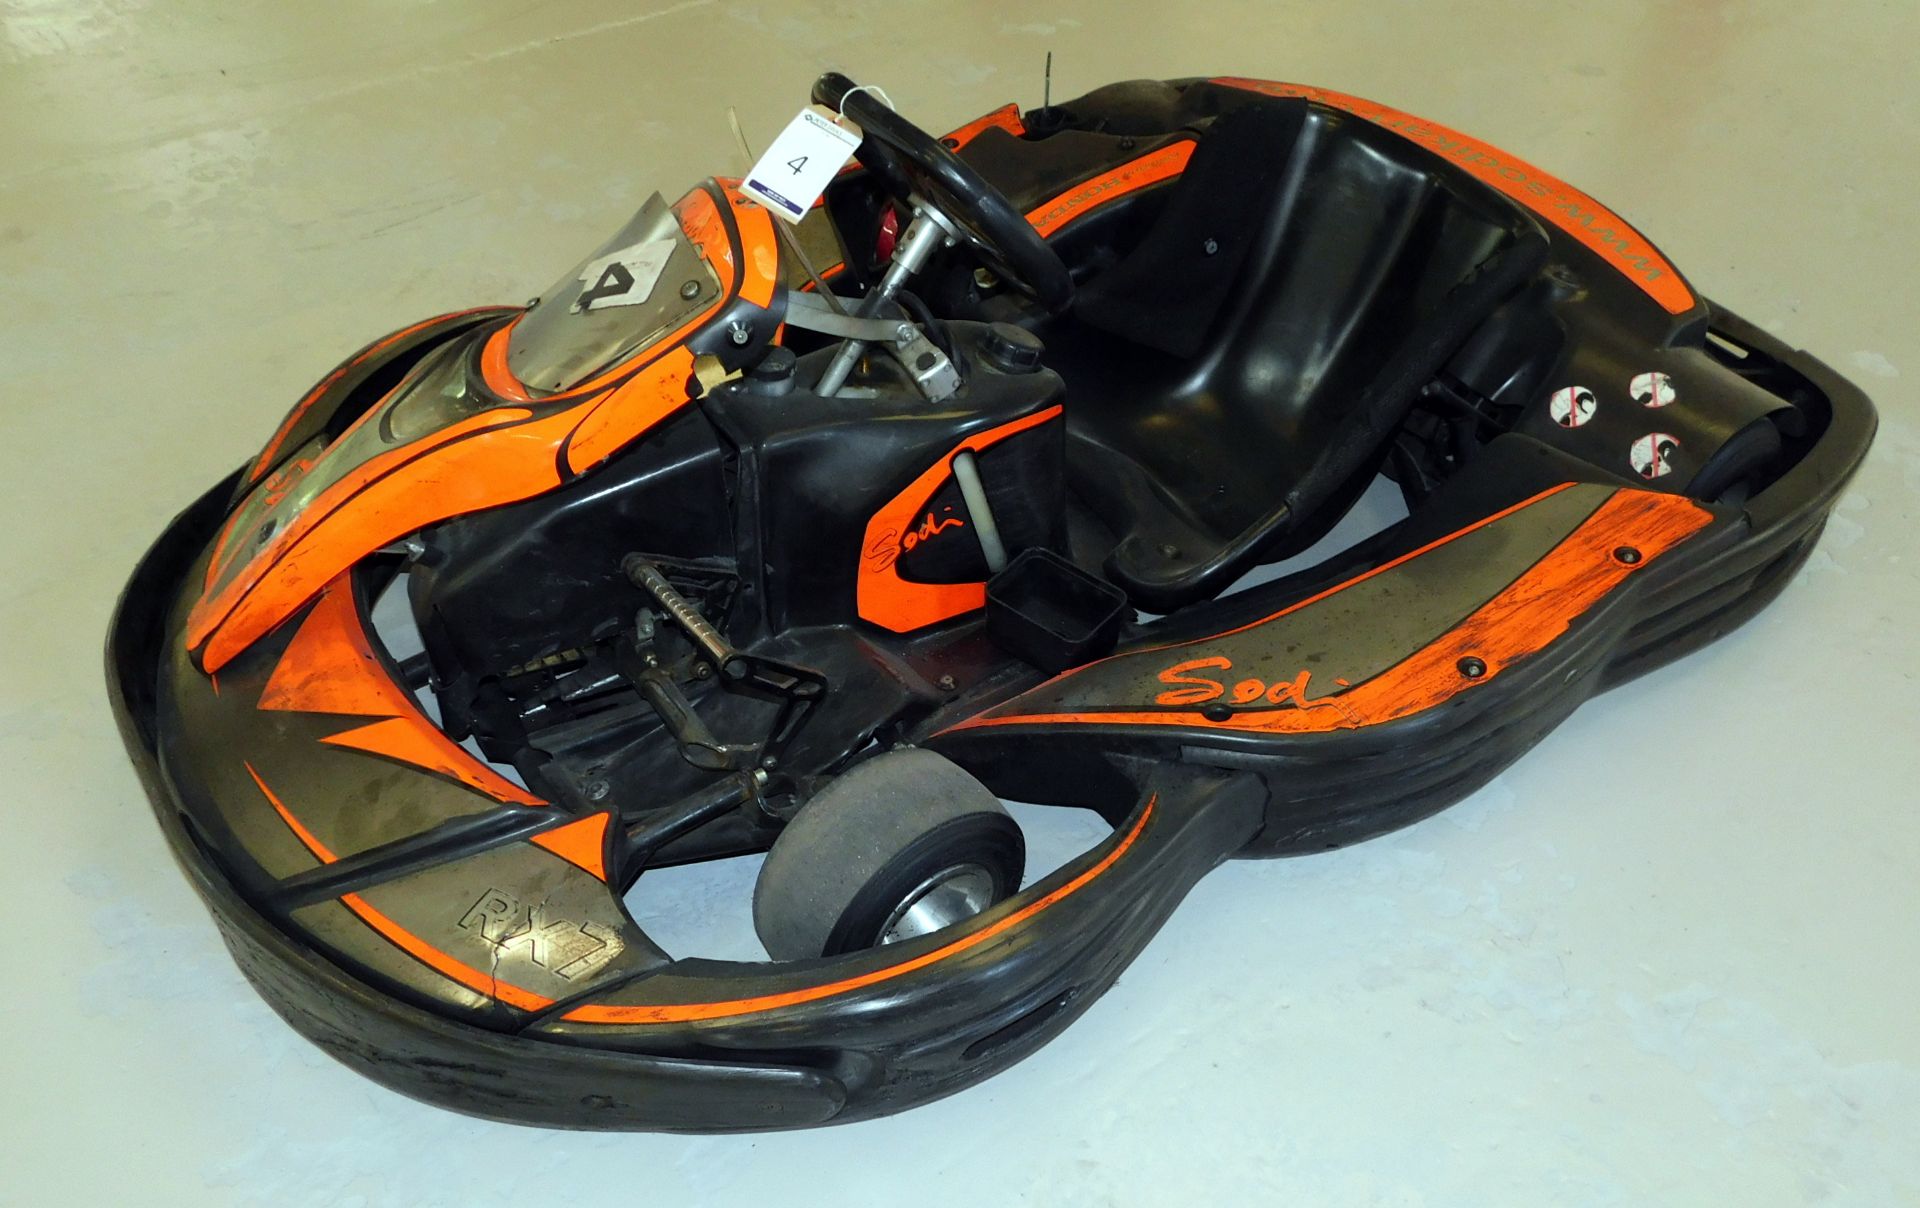 Sodi RX7 Petrol Powered Go-Kart with Honda 5.5 GX160 Engine (located in Bredbury, collection - Image 2 of 5